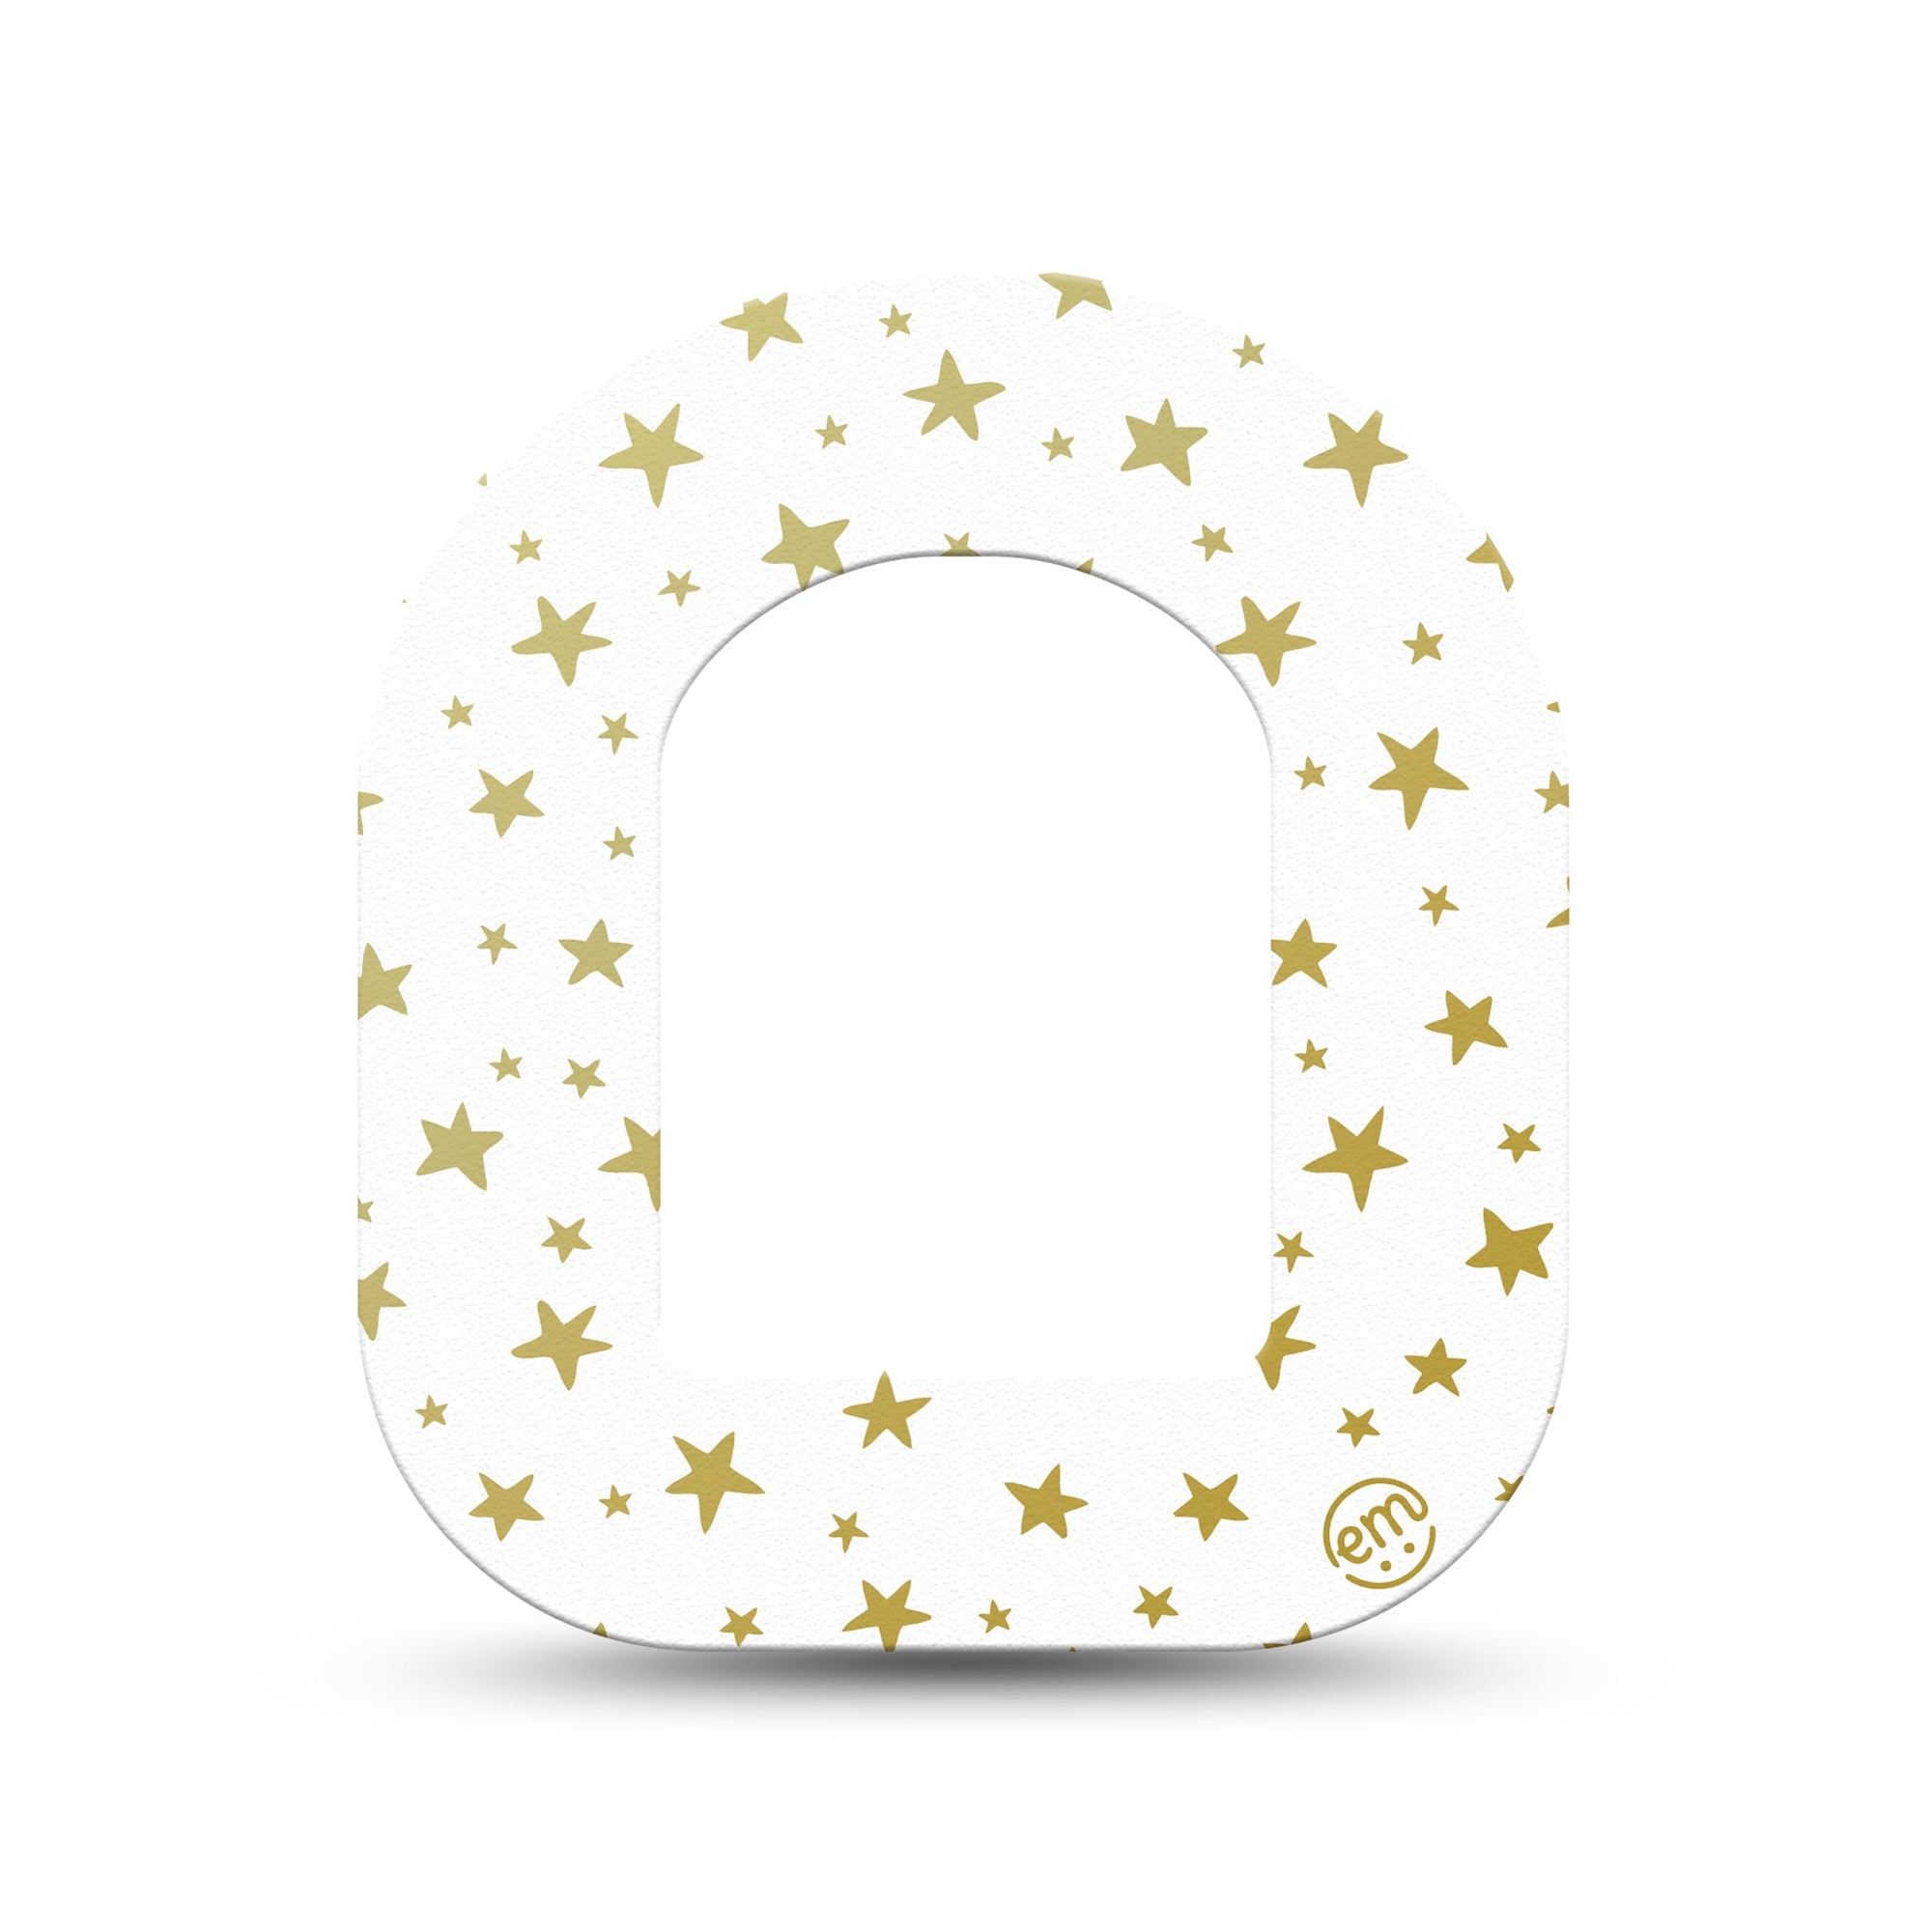 ExpressionMed Twinkling Stars Pod Mini Tape Single, Celestial Beauty Adhesive Patch Pump Design